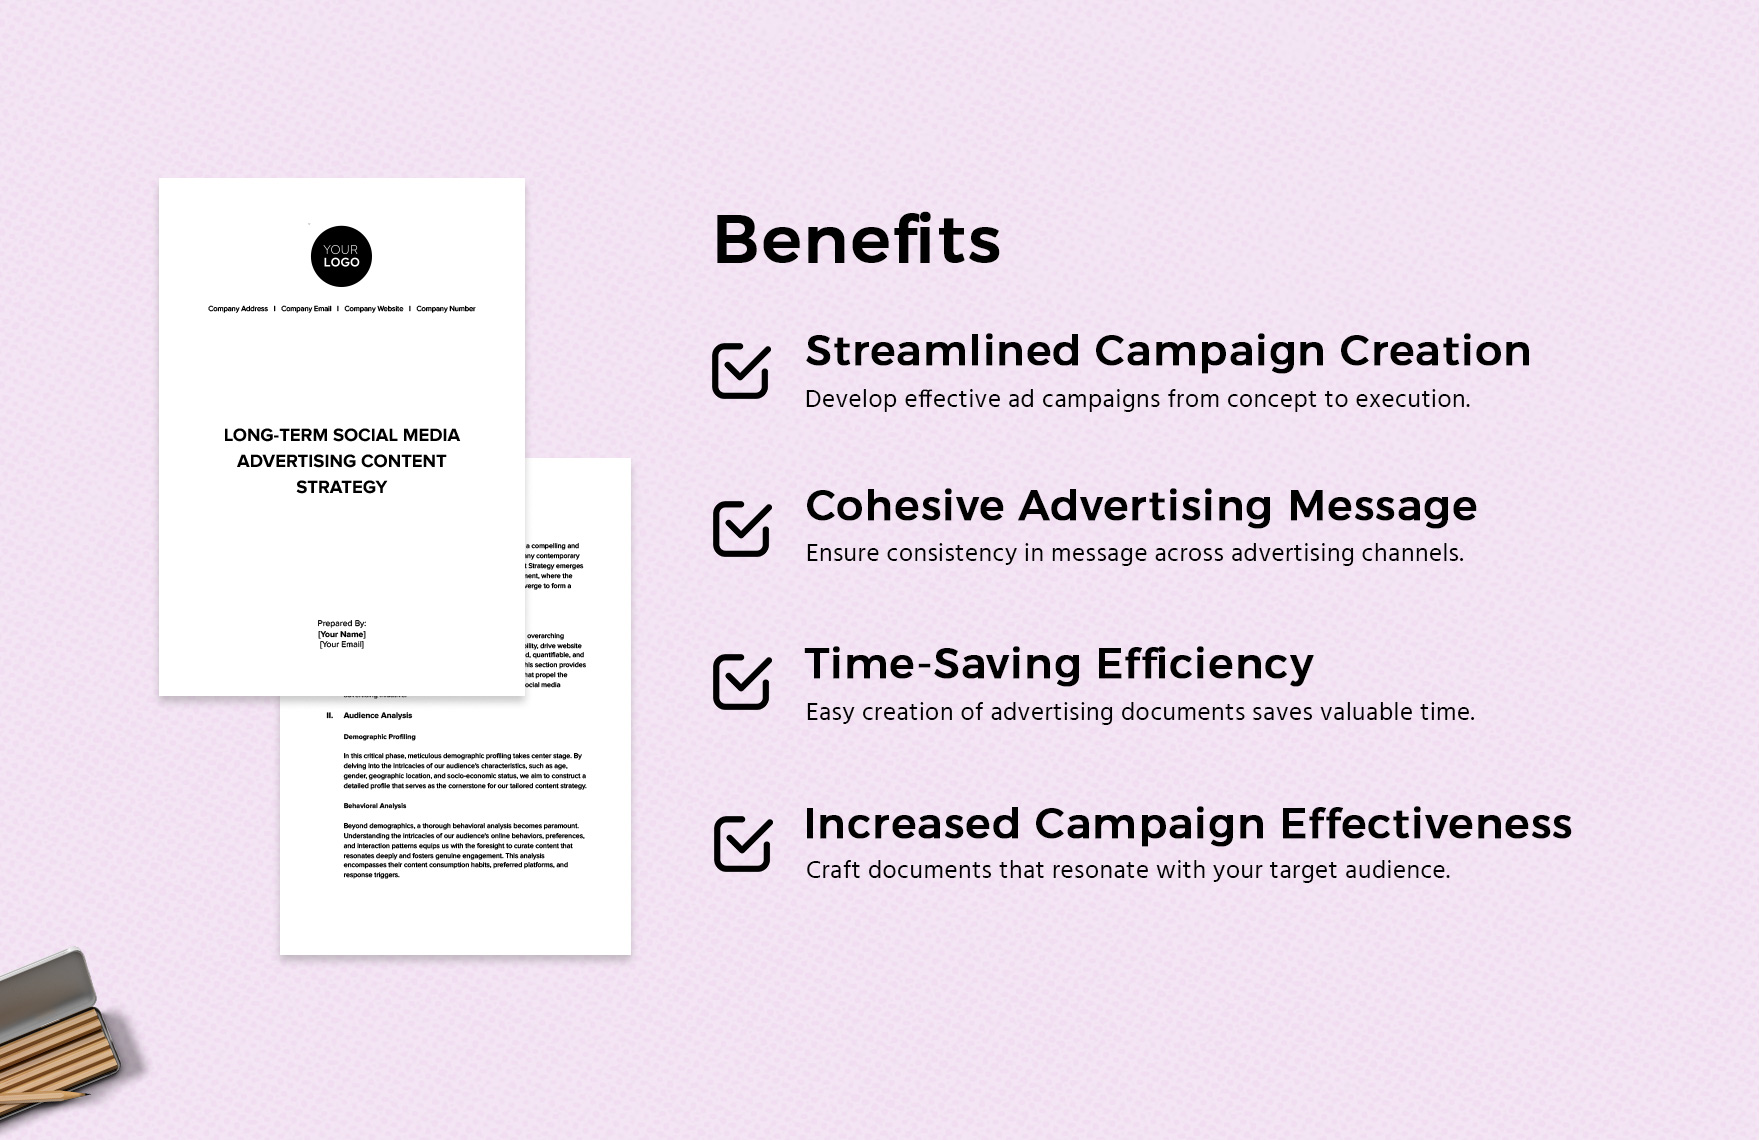 Long-Term Social Media Advertising Content Strategy Template